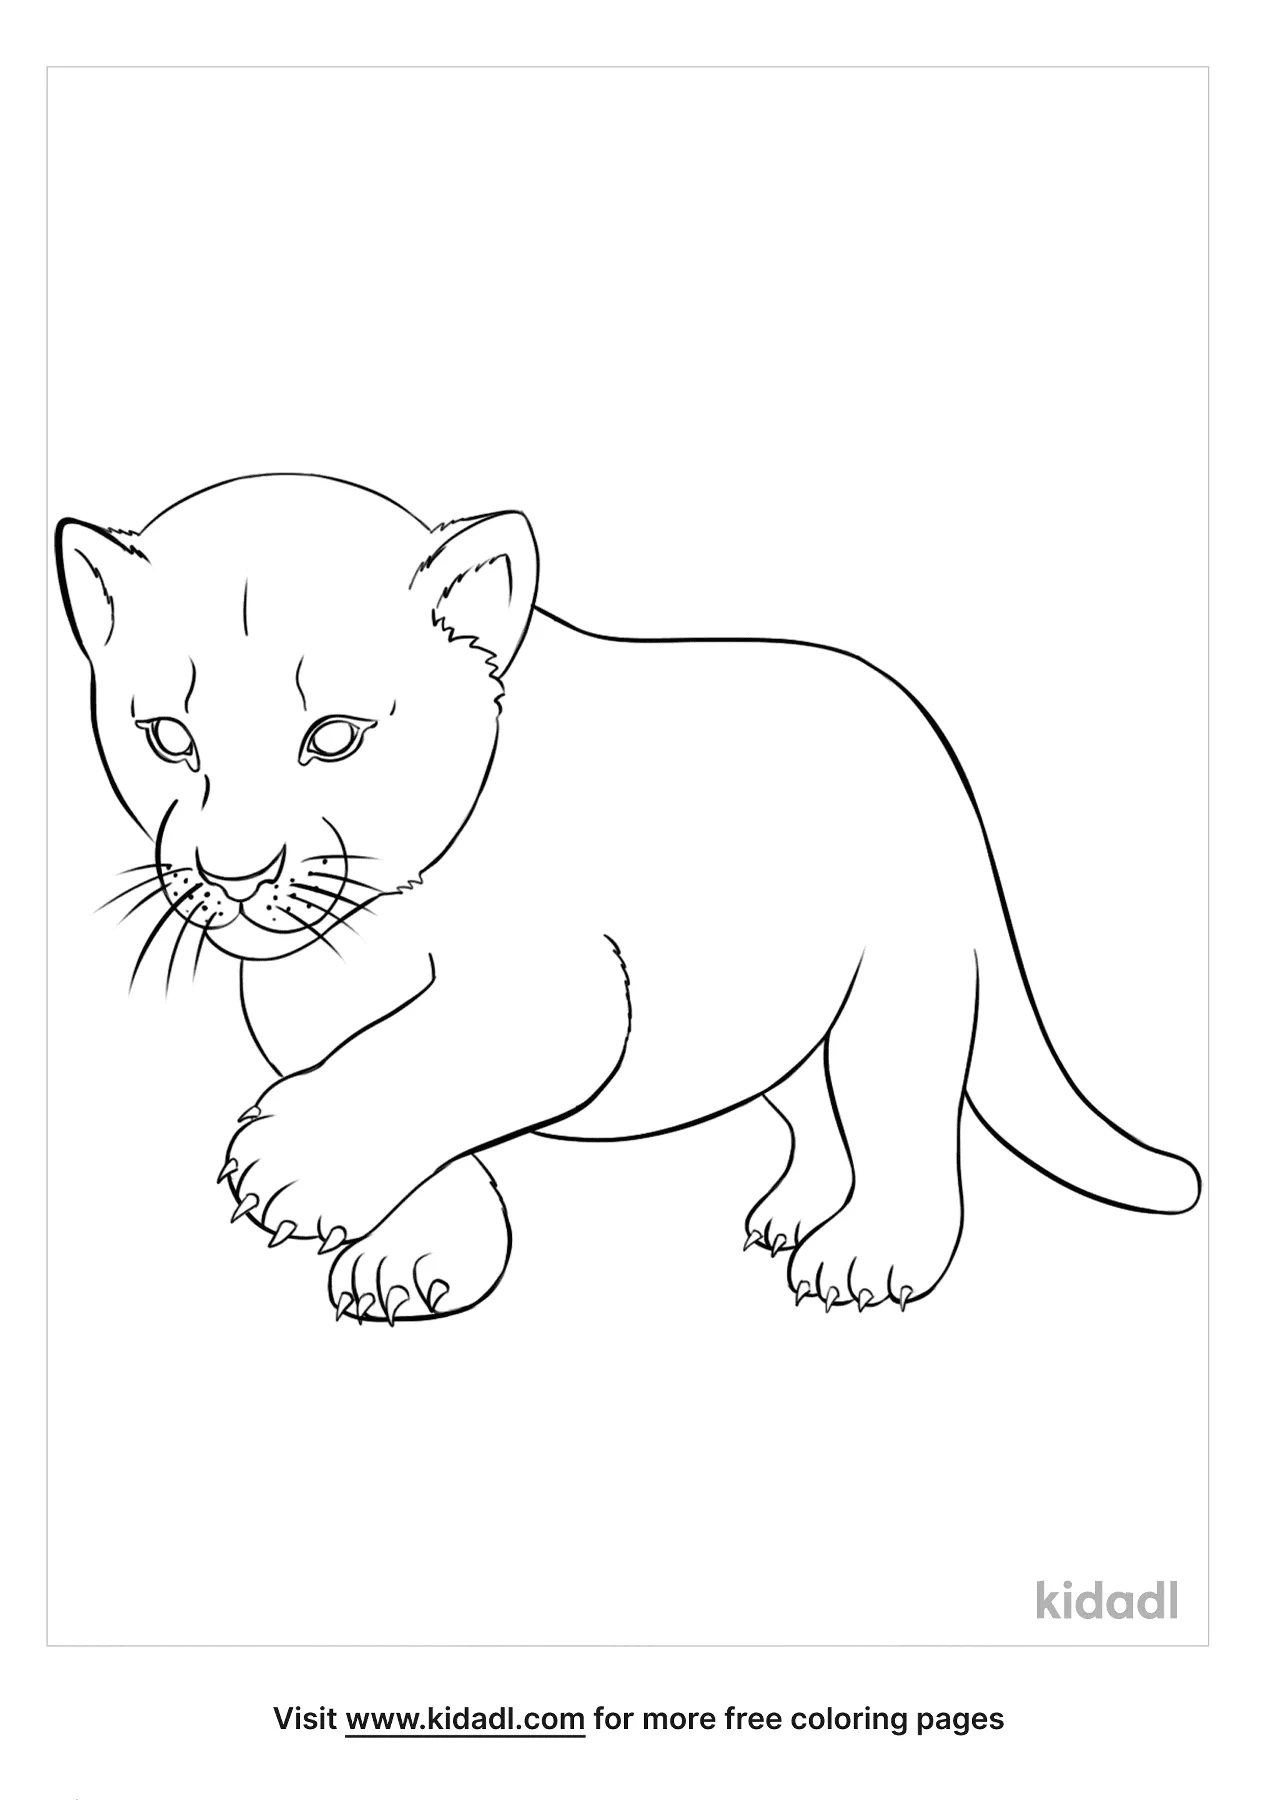 Baby Lion Coloring Pages Free Animals Coloring Pages Kidadl